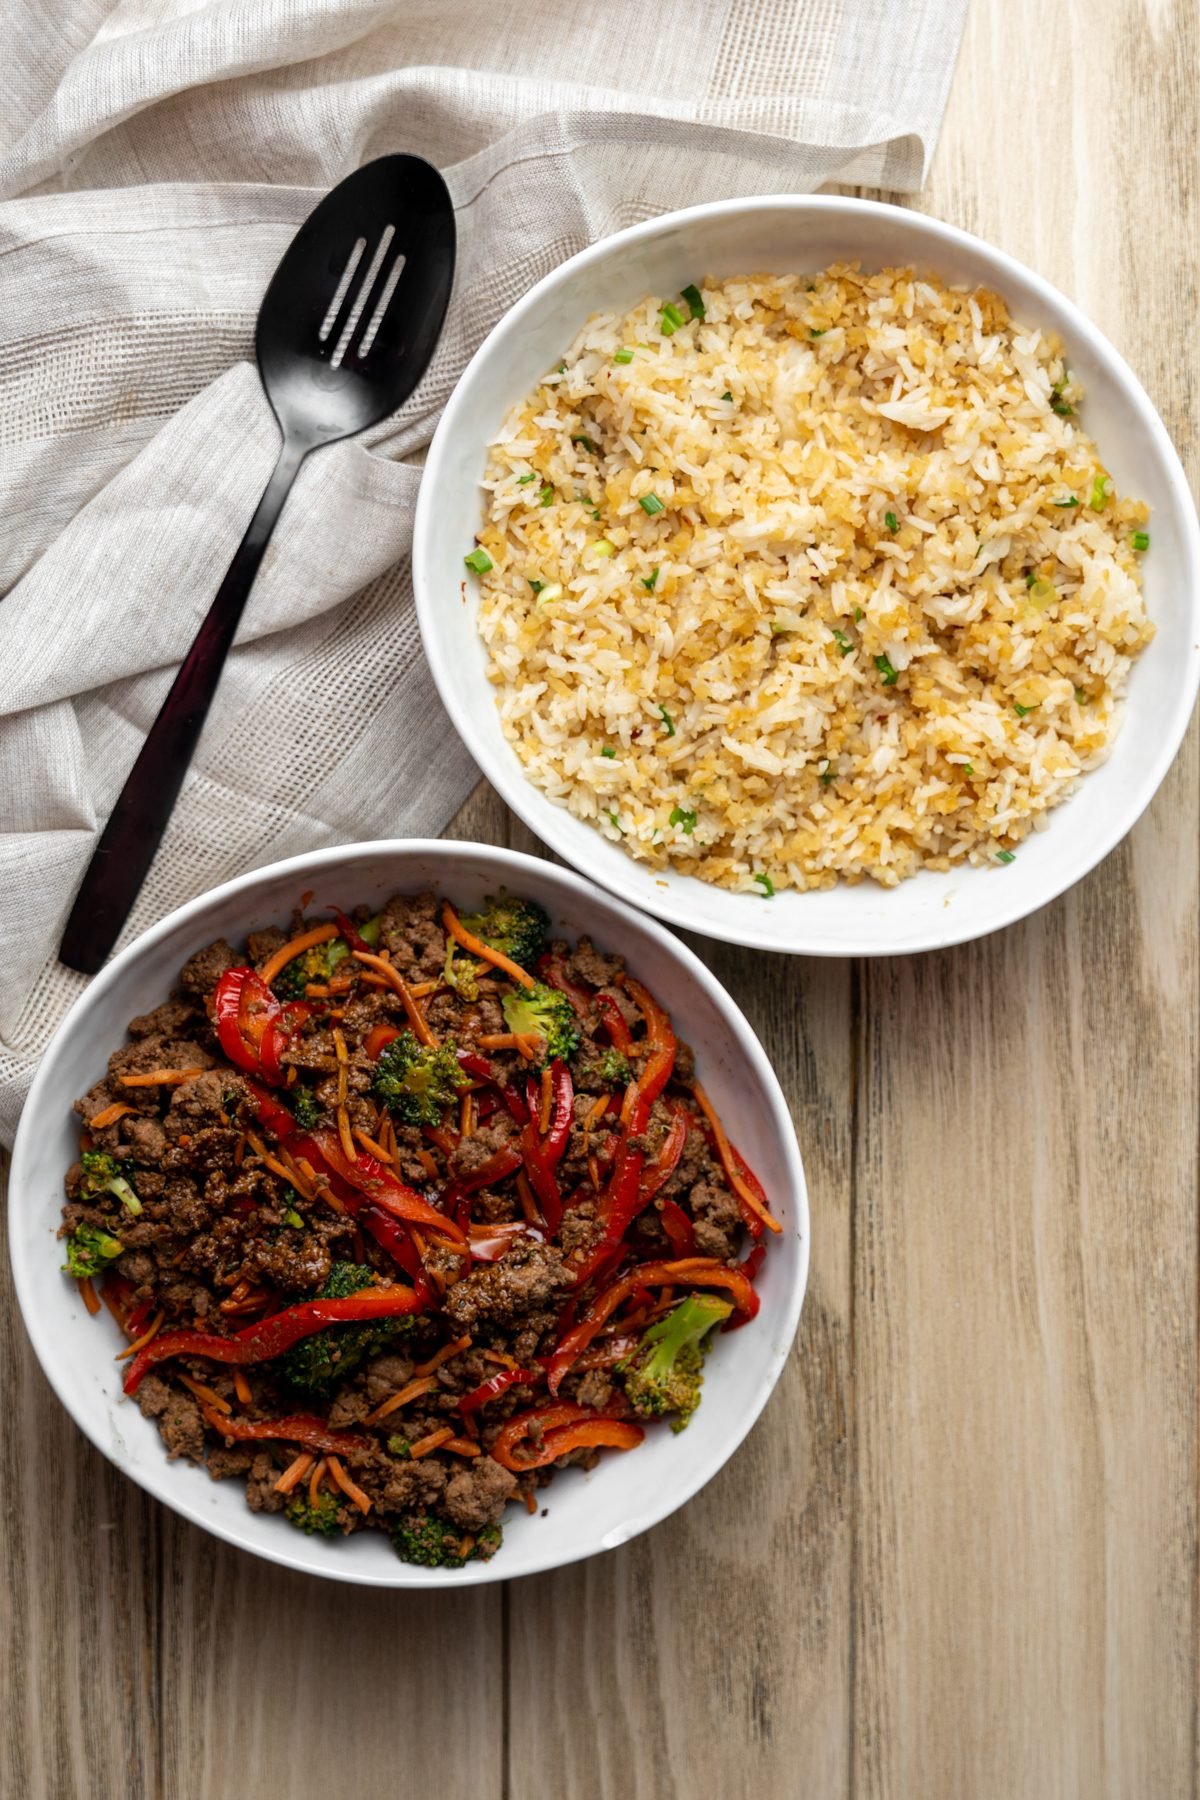 Two bowl - one with teriyaki beef and vegetables, the other with rice blend.